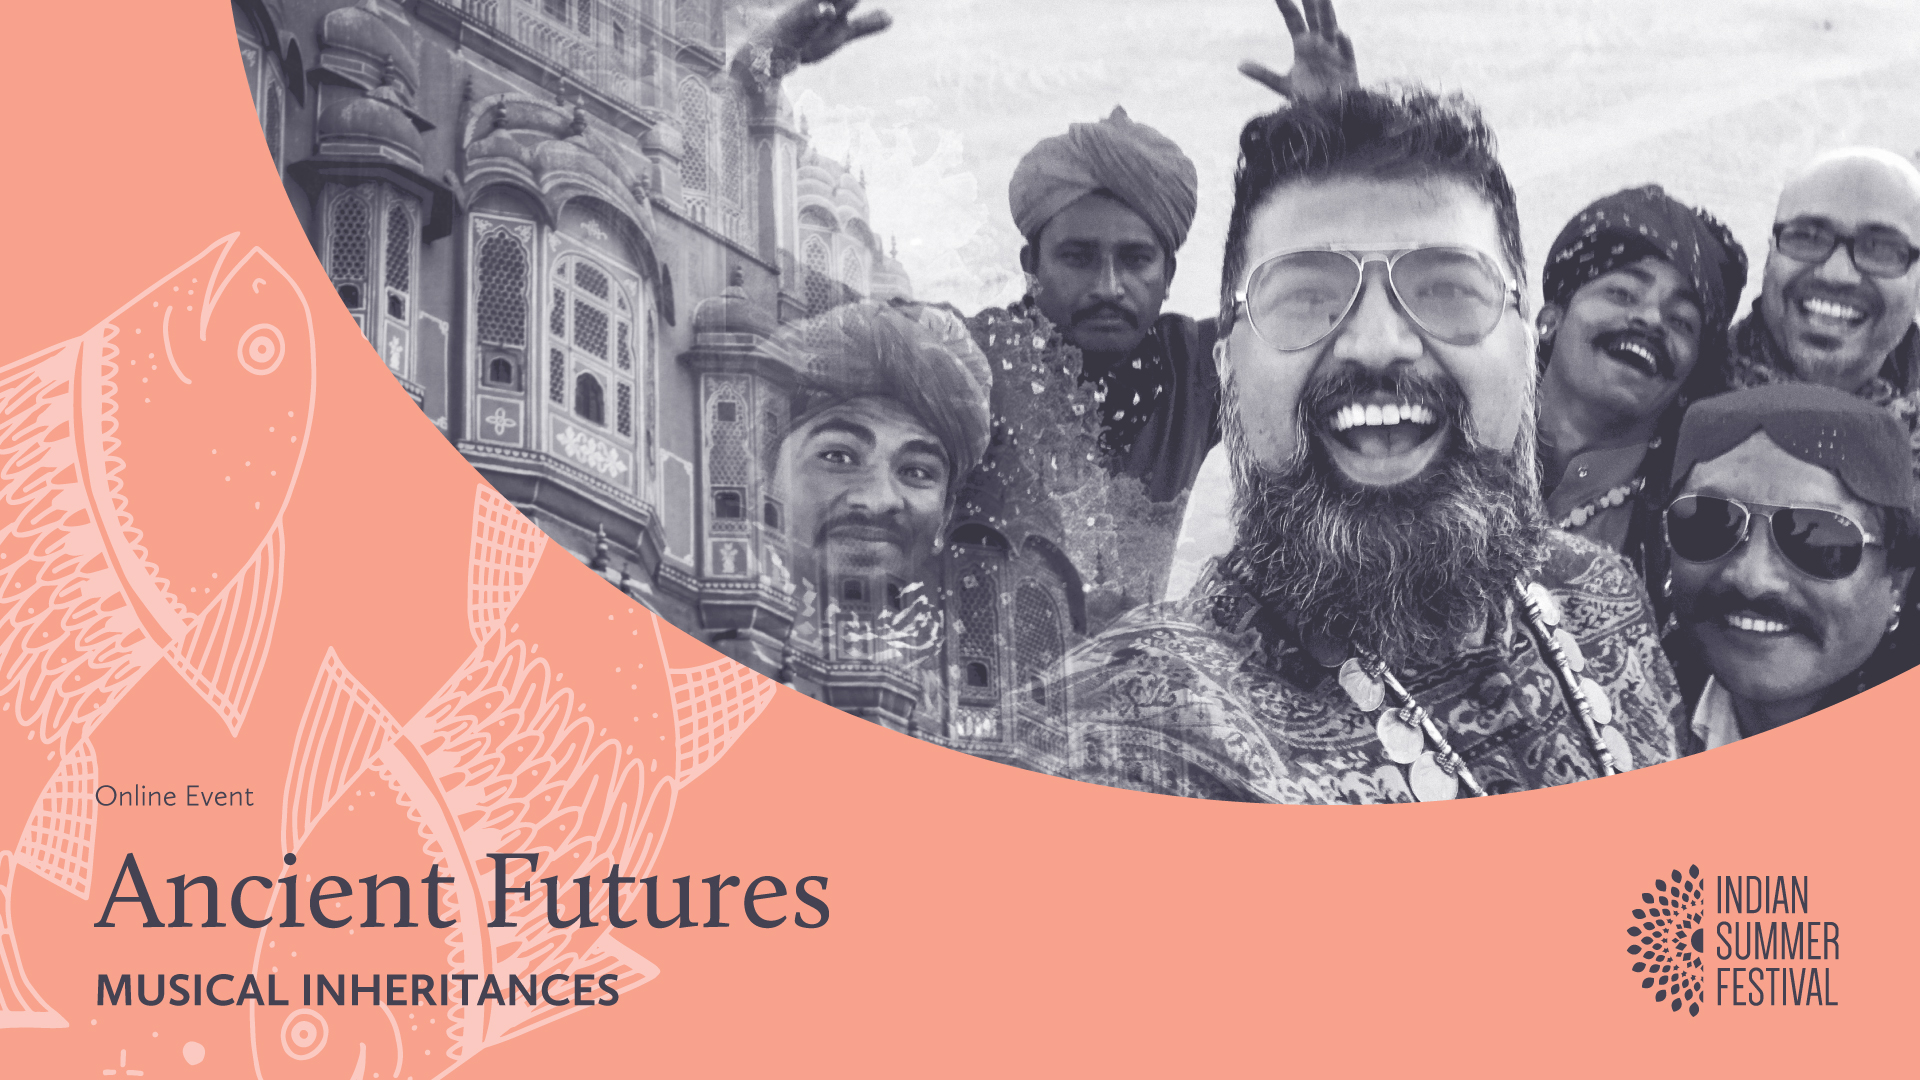 Online Event image for Ancient Futures, Musical Inheritances. Shows a black and white photo of grinning people outlined by a coral border with drawings of fish.